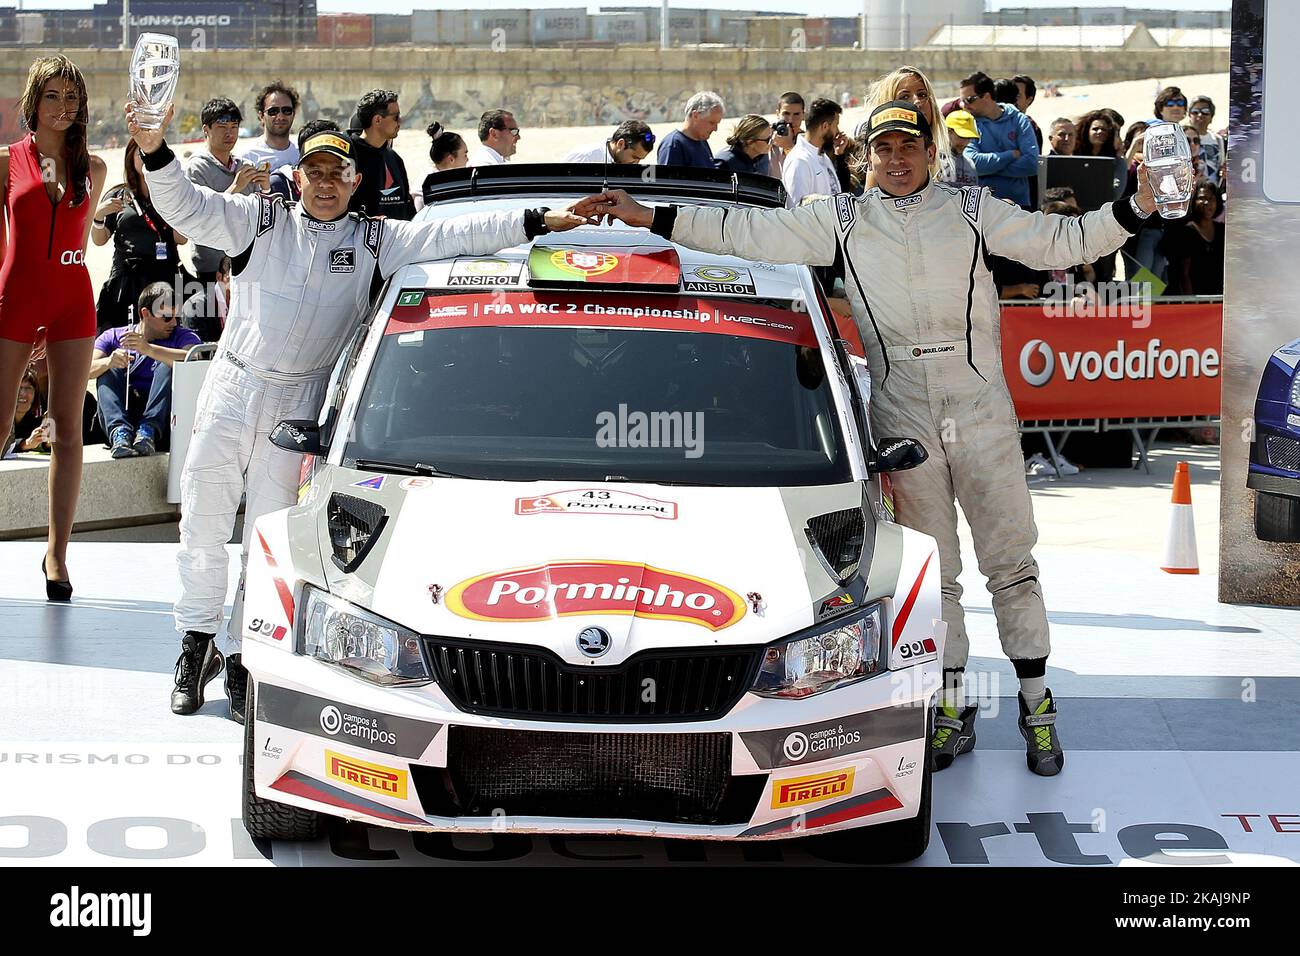 MIGUEL CAMPOS and CARLOS A. MAGALHÃES in SKODA FABIA R5 of team MIGUEL JORGE RIBEIRO DE CAMPOS Portuguese rally winners during the ceremony podium of the WRC Vodafone Rally Portugal 2016 in Matosinhos - Portugal, on May 22, 2016. (Photo by Paulo Oliveira / DPI / NurPhoto) *** Please Use Credit from Credit Field *** Stock Photo